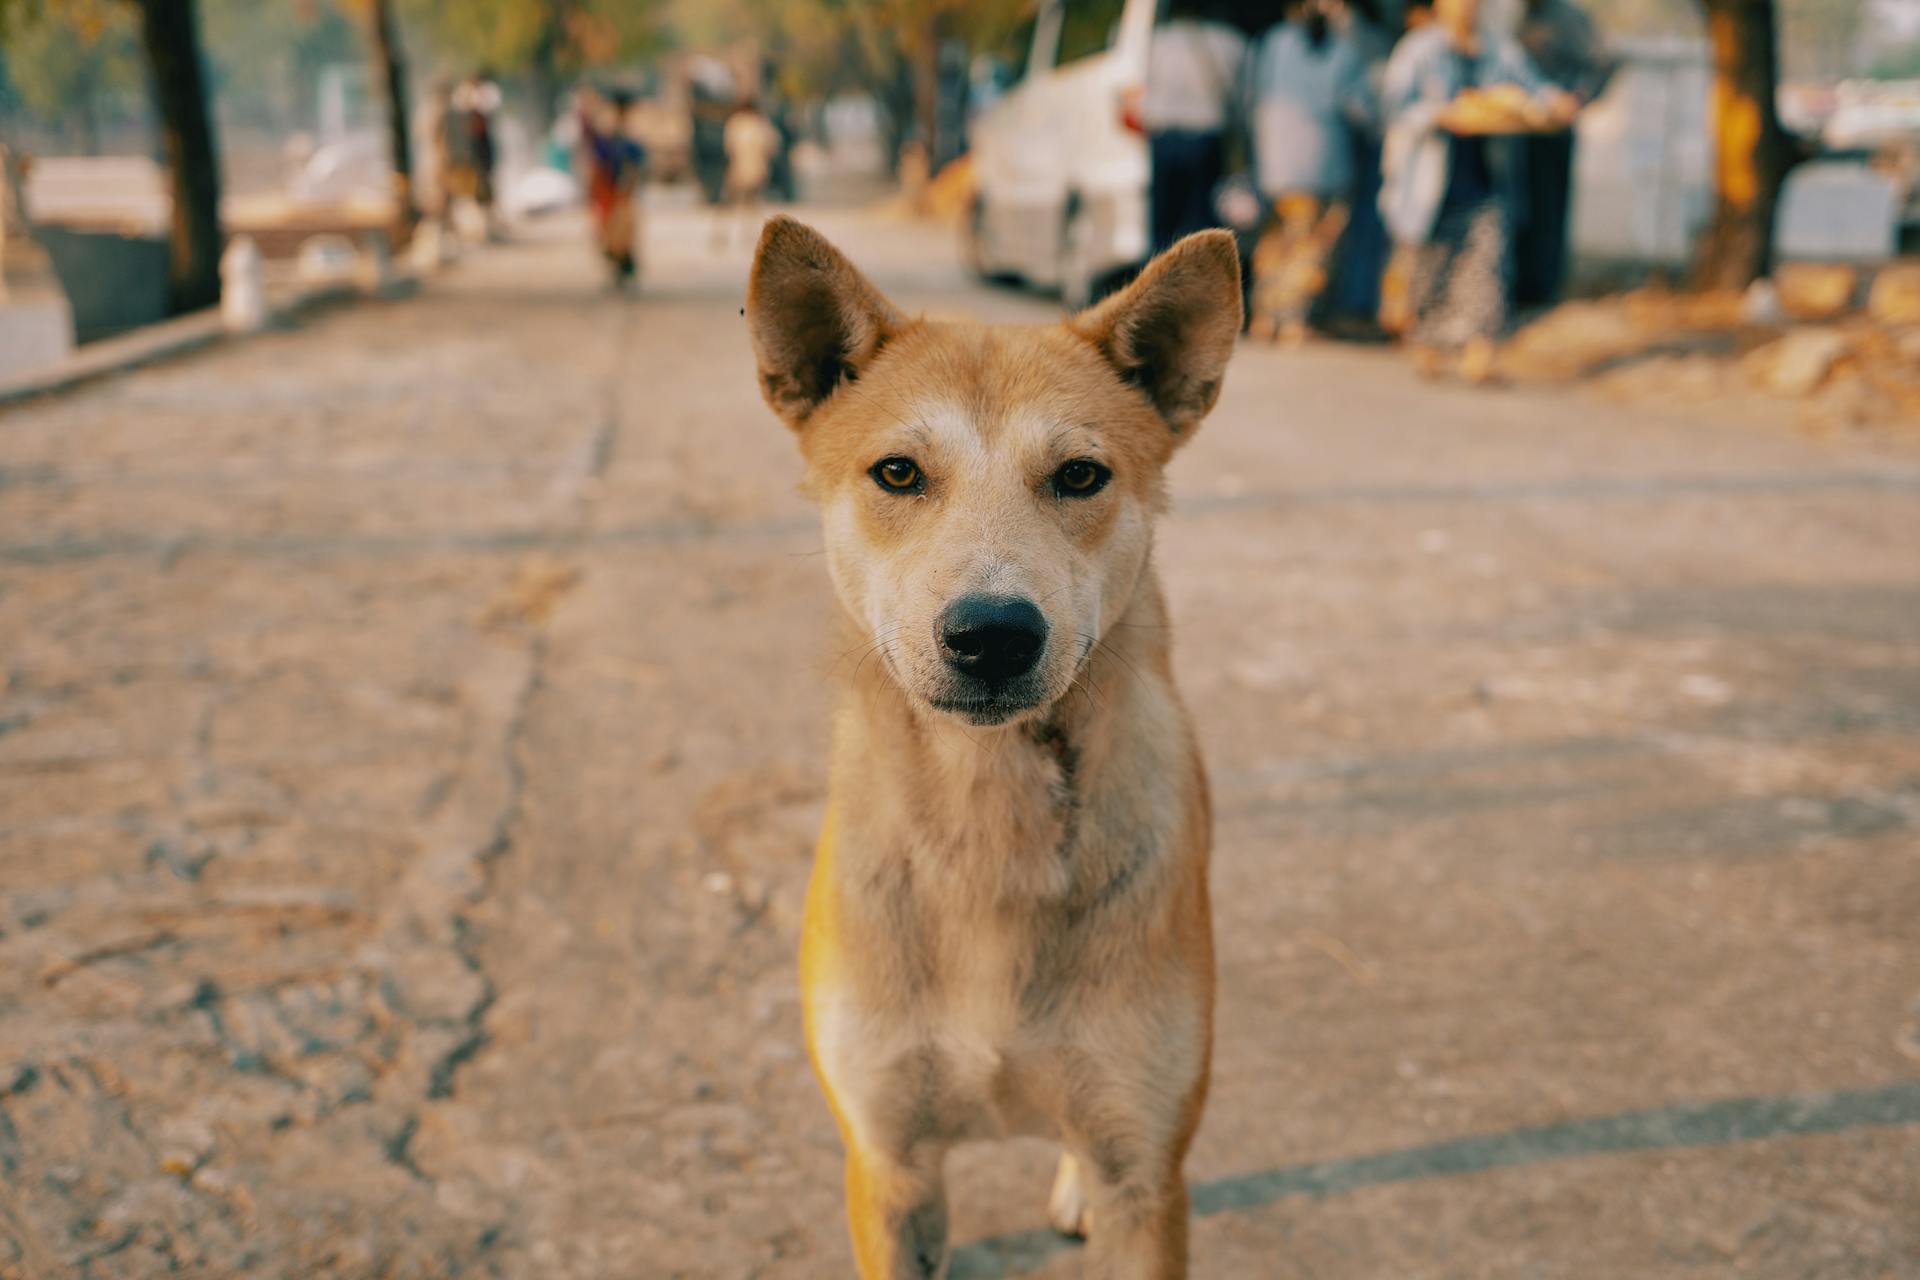 5 ways an animal NGO in India can help care for stray animals